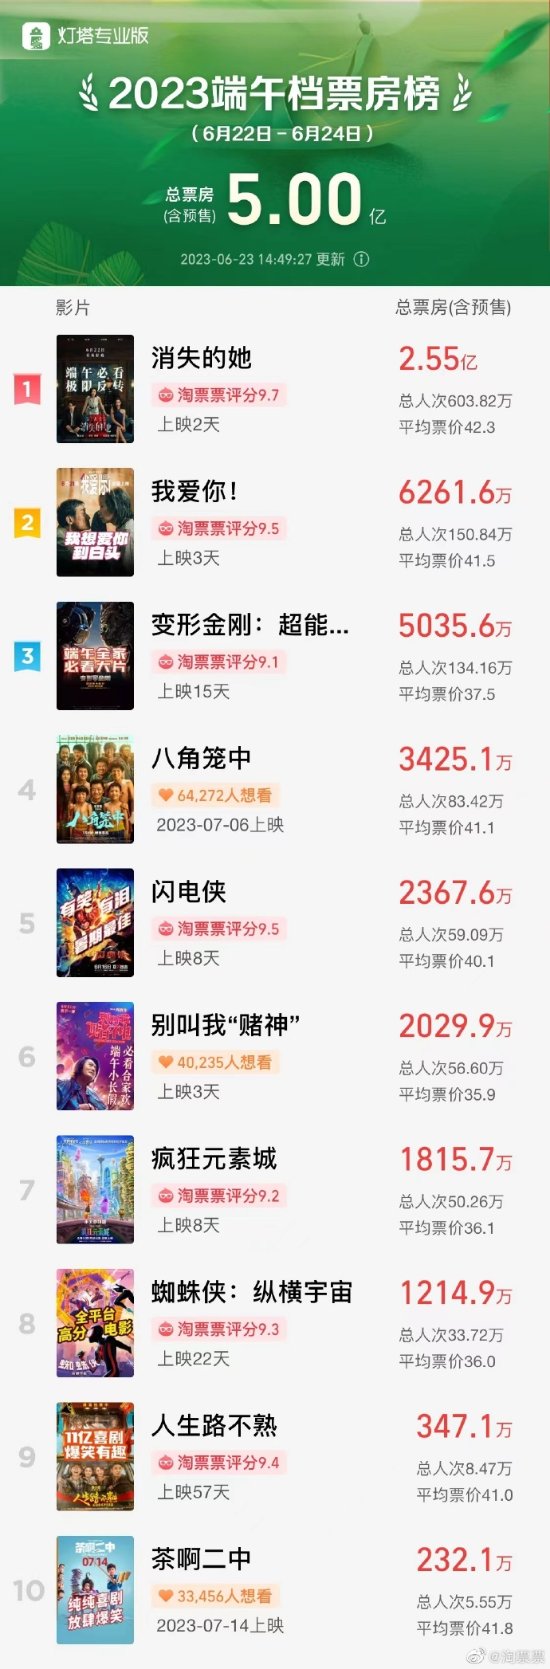 Vanished: Record-breaking Box Office of 500 Million Yuan during the 2023 Dragon Boat Festival Season